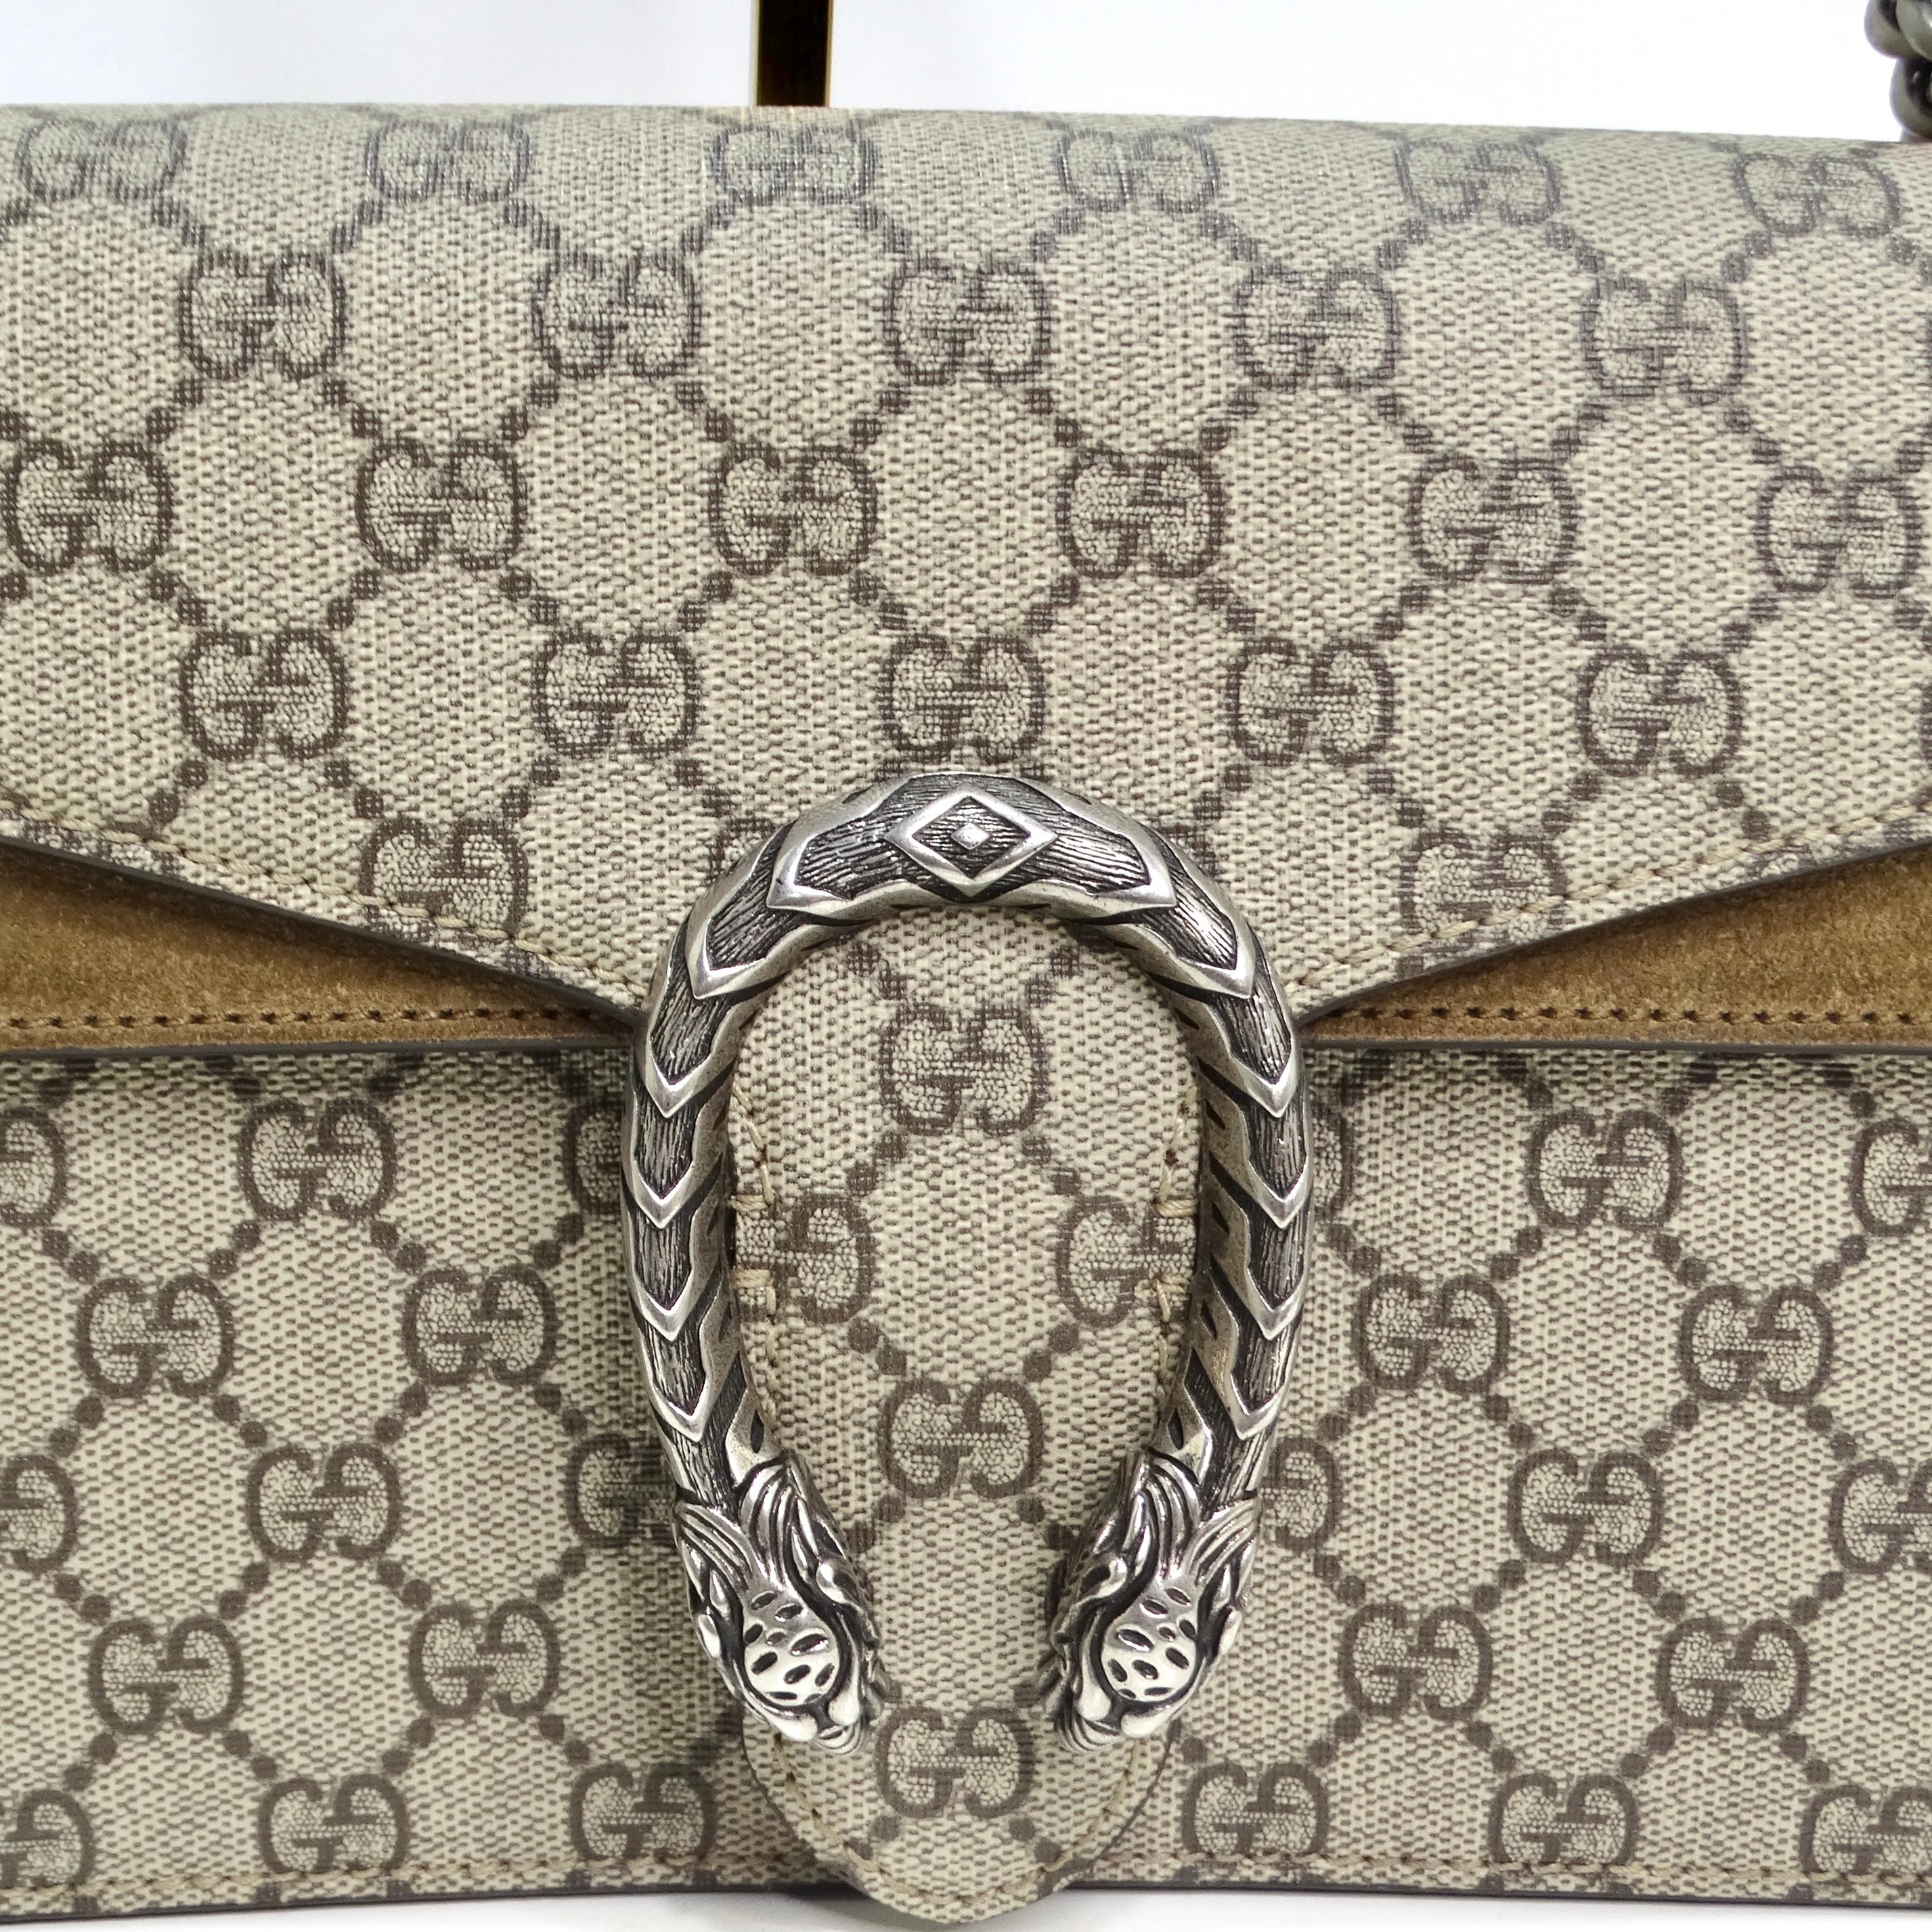 The Gucci GG Supreme Monogram Suede Dionysus Shoulder Bag is a chic and modern accessory that seamlessly combines timeless elegance with versatile design. Crafted from taupe Gucci GG monogram canvas, the bag exudes sophistication and showcases the